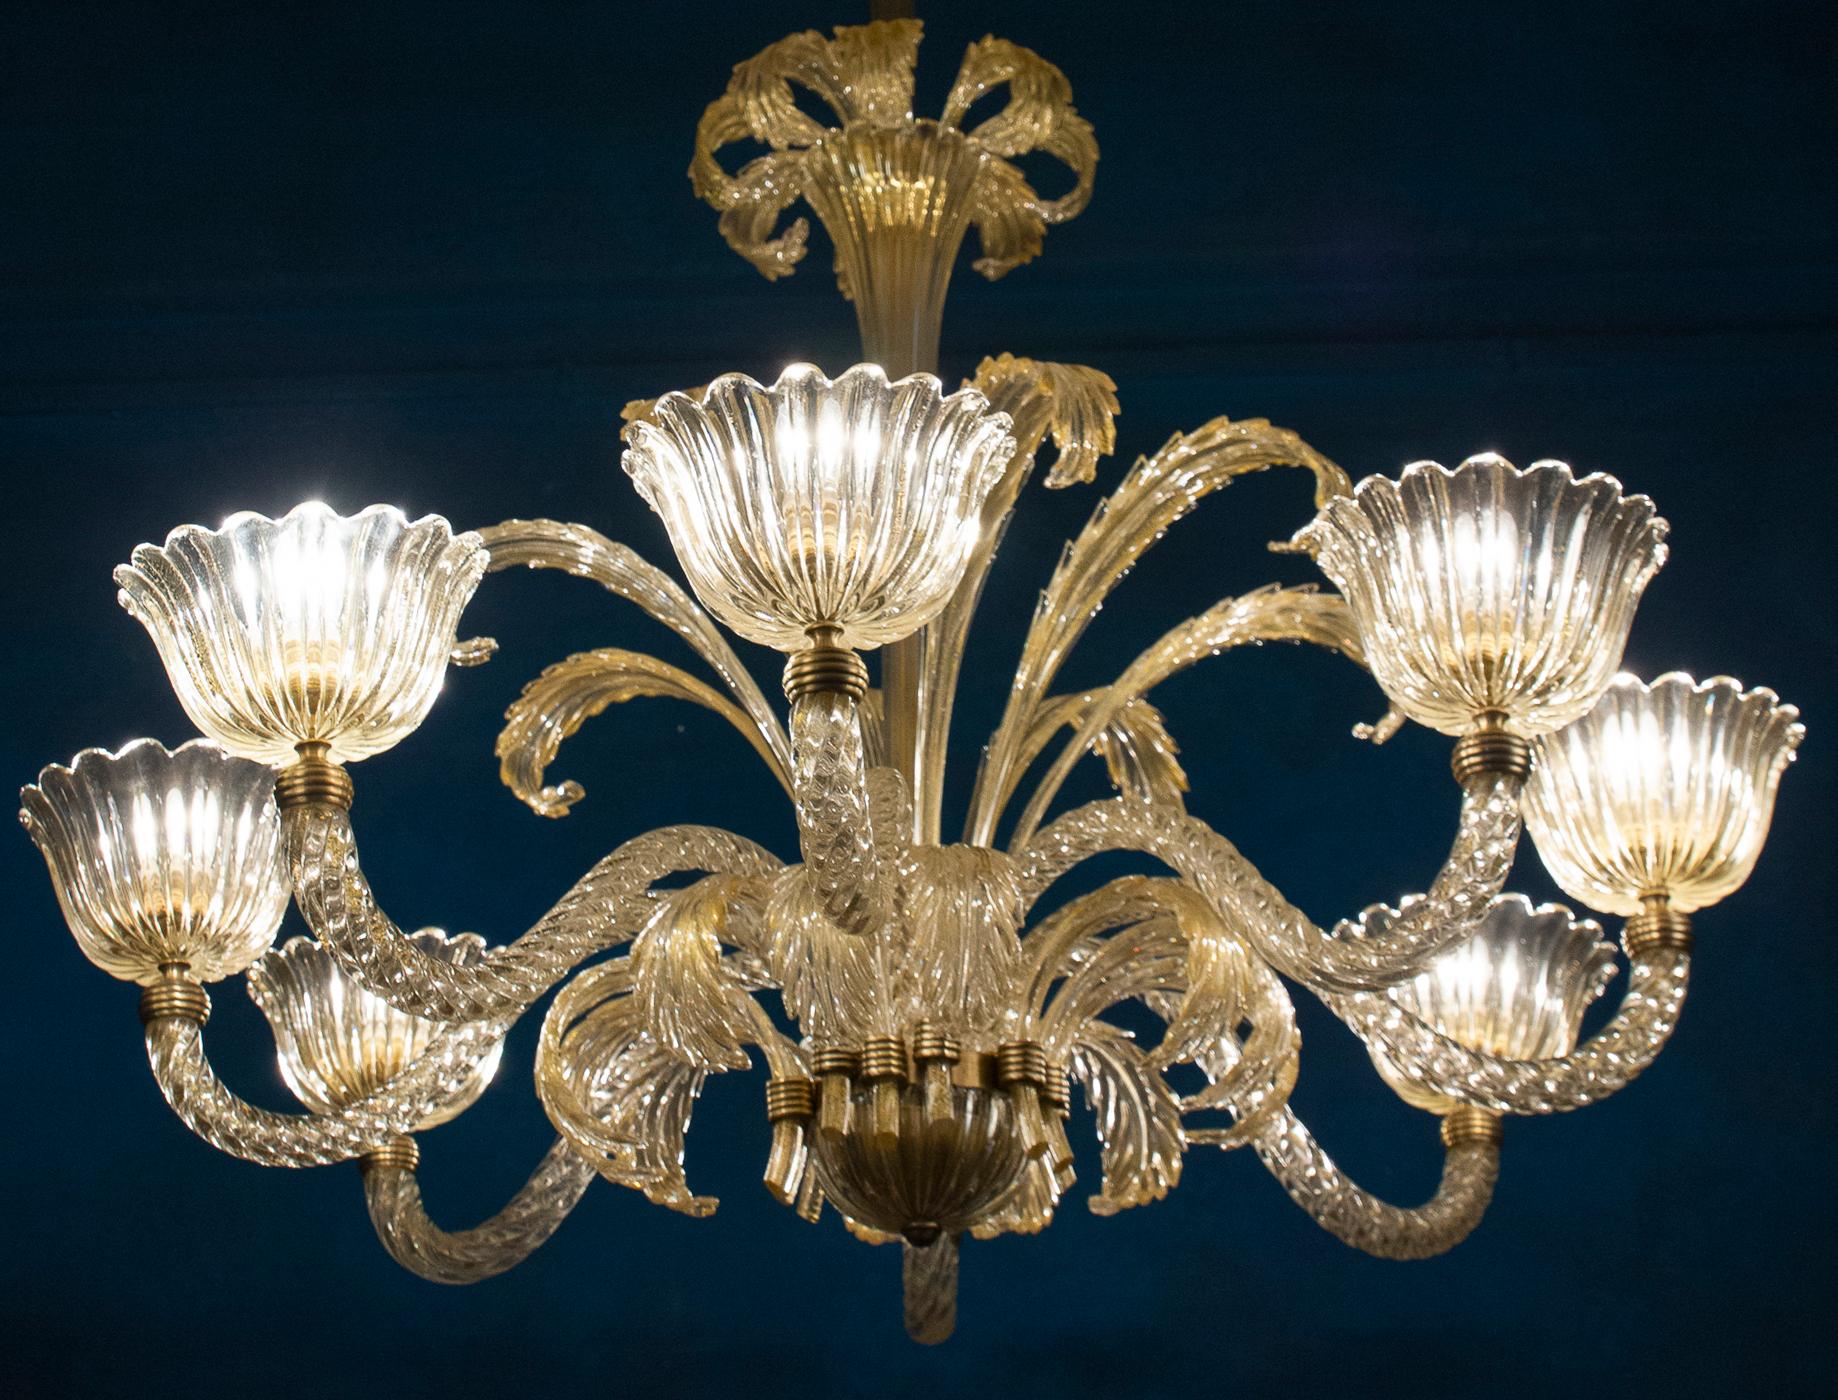 Magnificent Art Deco Mounted Murano Glass Chandelier by Ercole Barovier, 1940 For Sale 10